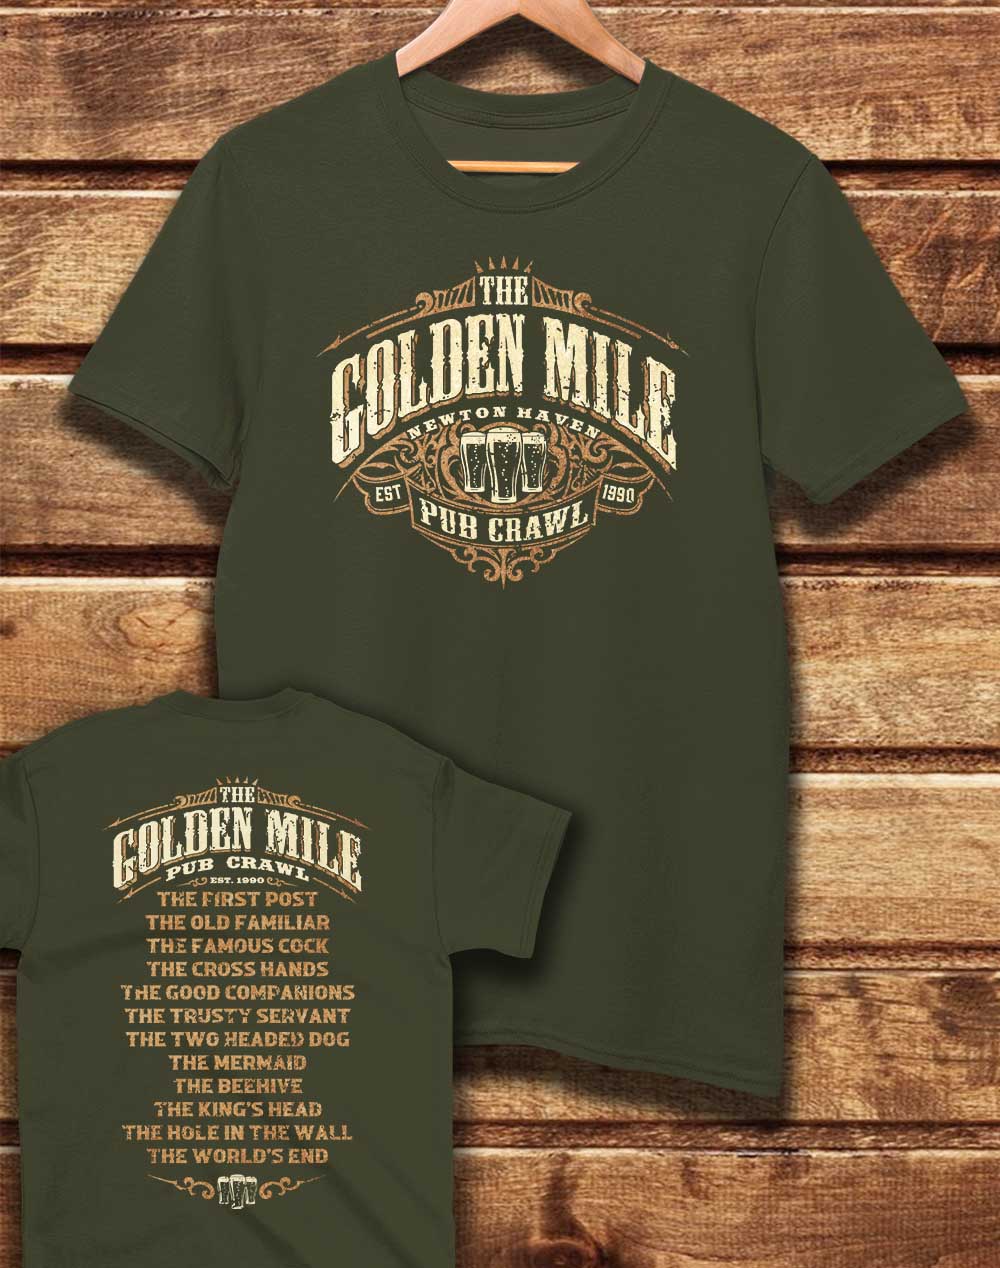 Moss Green - DELUXE The Golden Mile Pub Crawl Organic Cotton T-Shirt